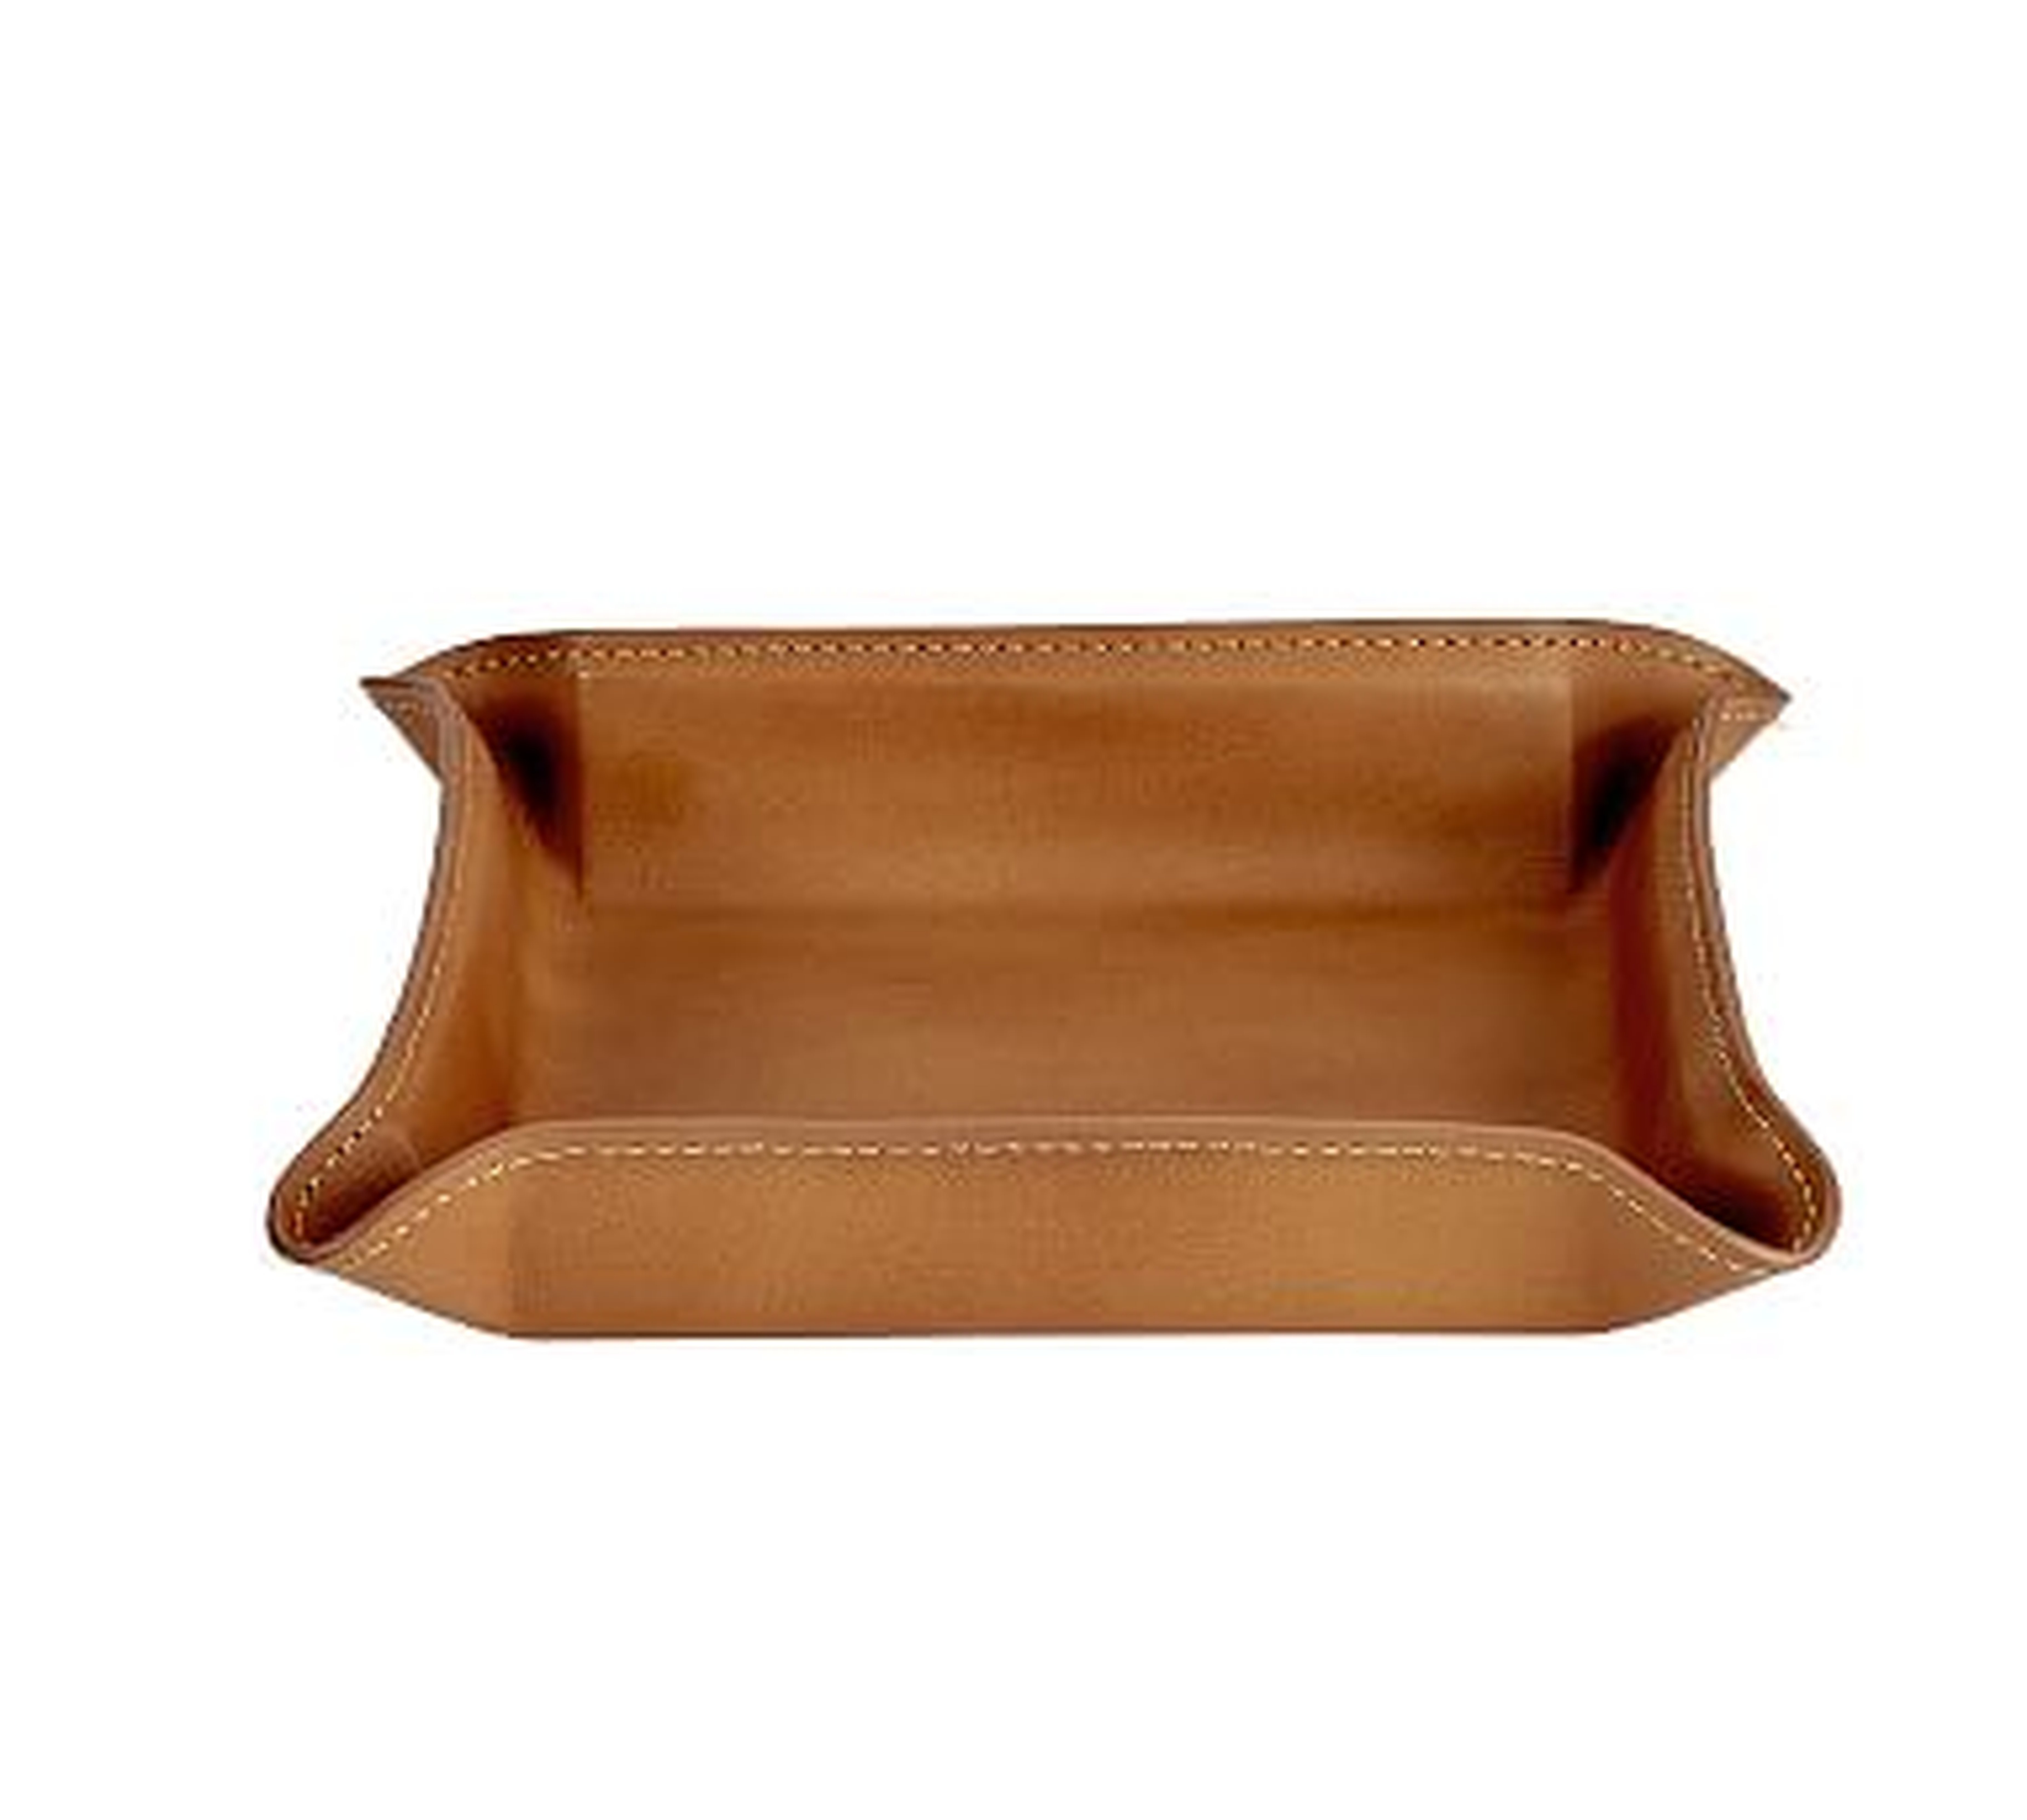 Marlo Leather Catchall, Tan - Pottery Barn